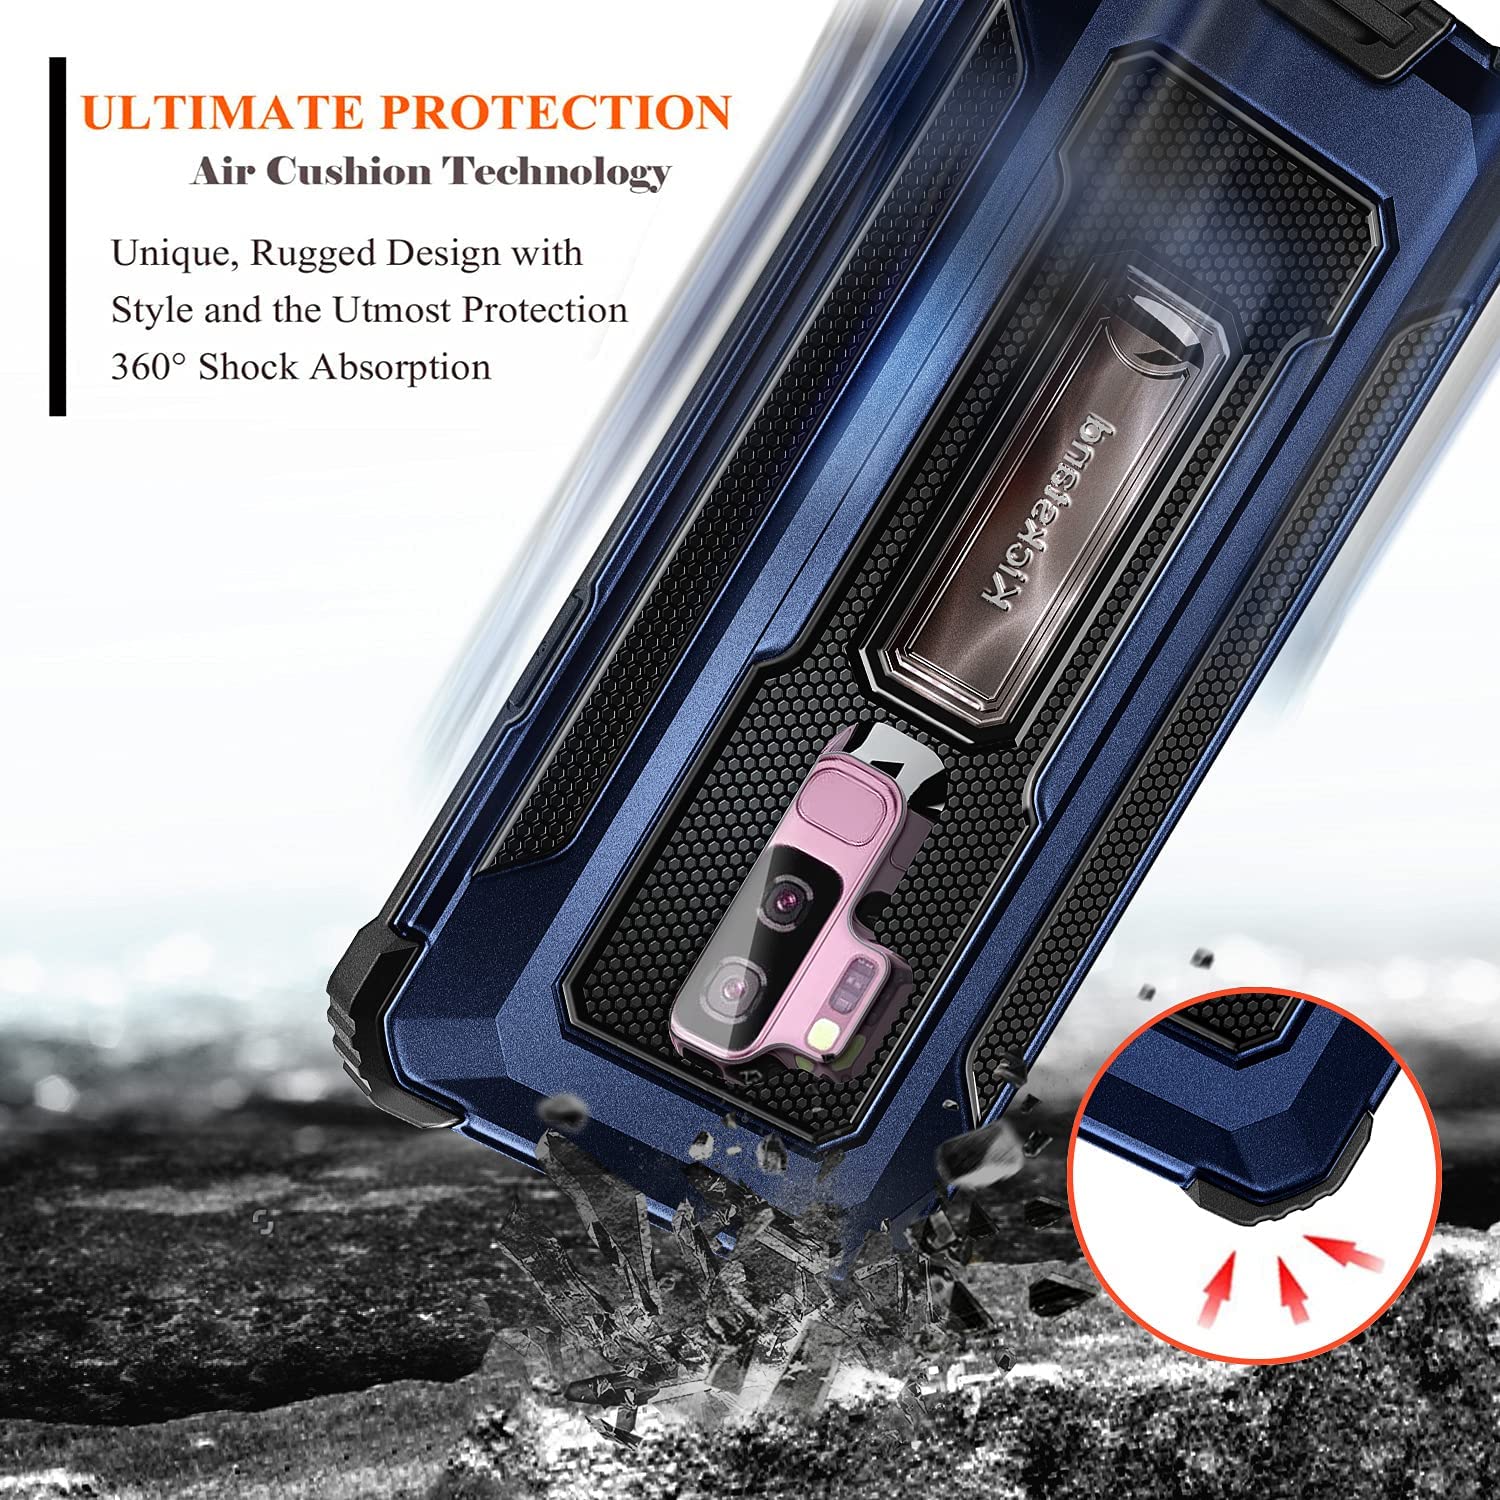 Nagebee Case for Samsung Galaxy S9 Plus with Screen Protector (Soft Full Coverage), Full-Body Armor Hybrid [Military Grade] Shockproof Built-in Kickstand Heavy Duty Durable Case (Blue) - image 4 of 6